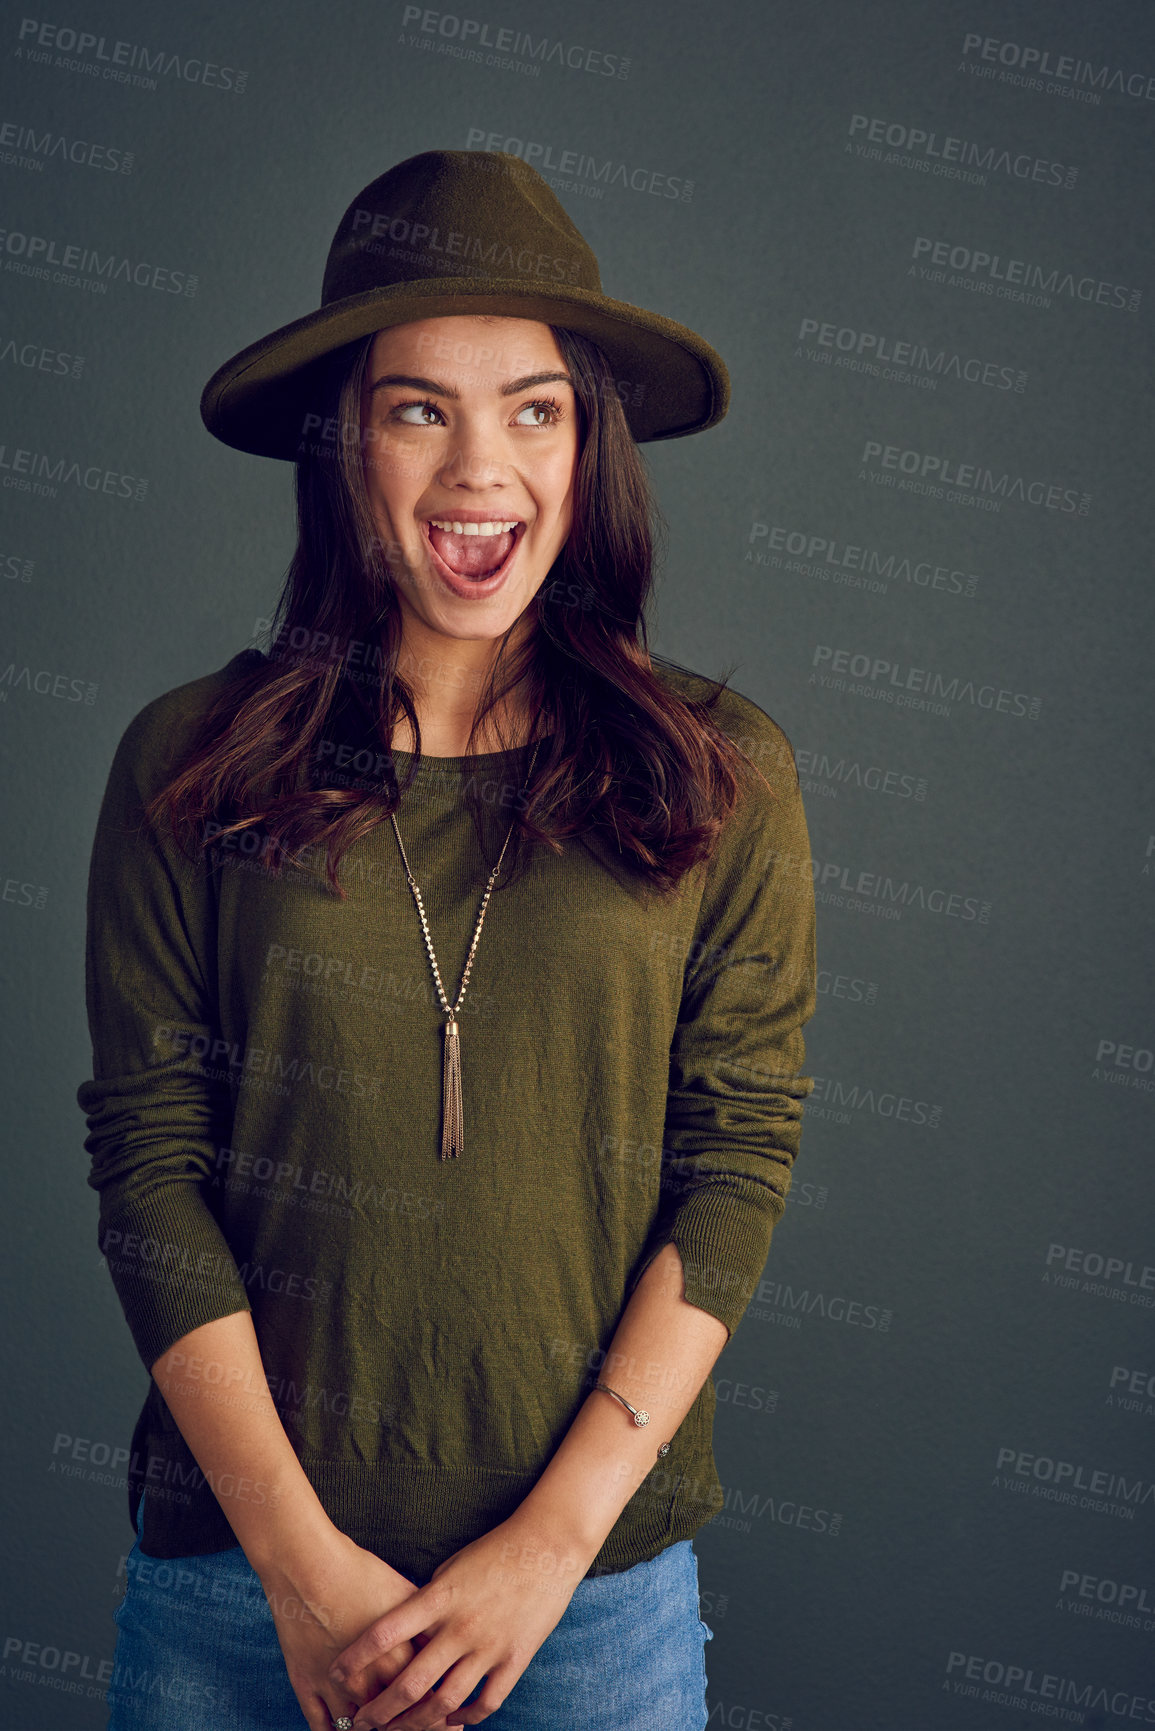 Buy stock photo Studio shot of a carefree young woman posing with a hat while standing against a dark background